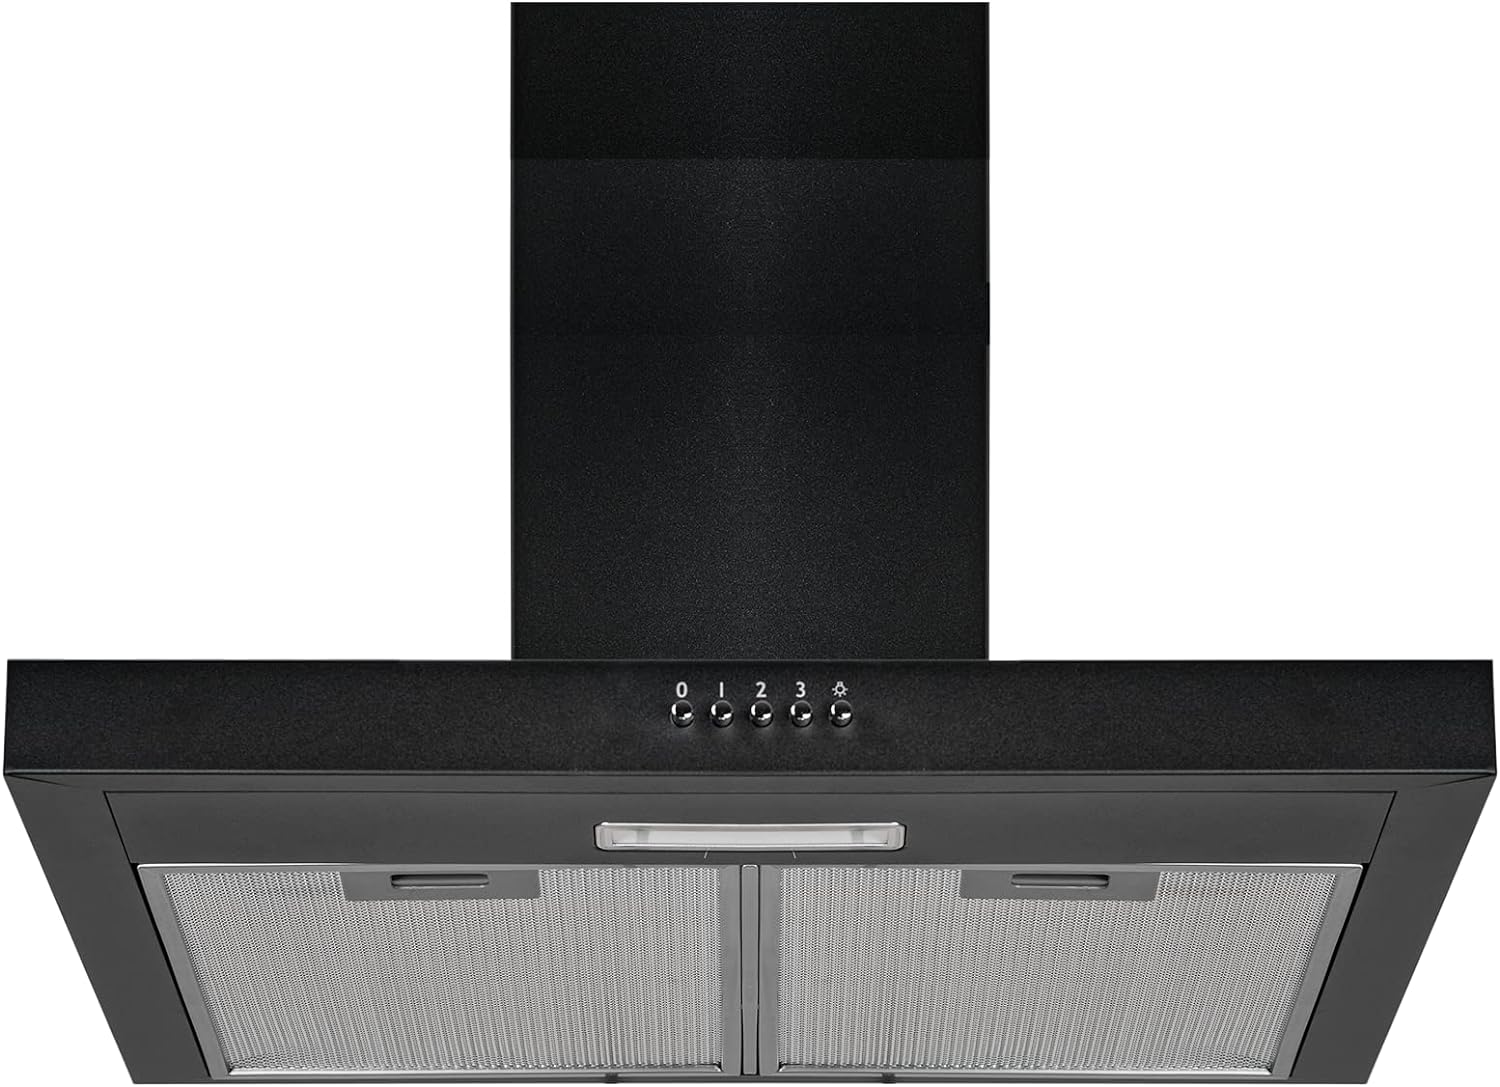 SIA TBC60BL COOKER HOOD 60cm LED Lighting - Black, Low Noise Operation, 3 Speeds, Push Button Control, Washable Grease Filters - Amazing Gadgets Outlet